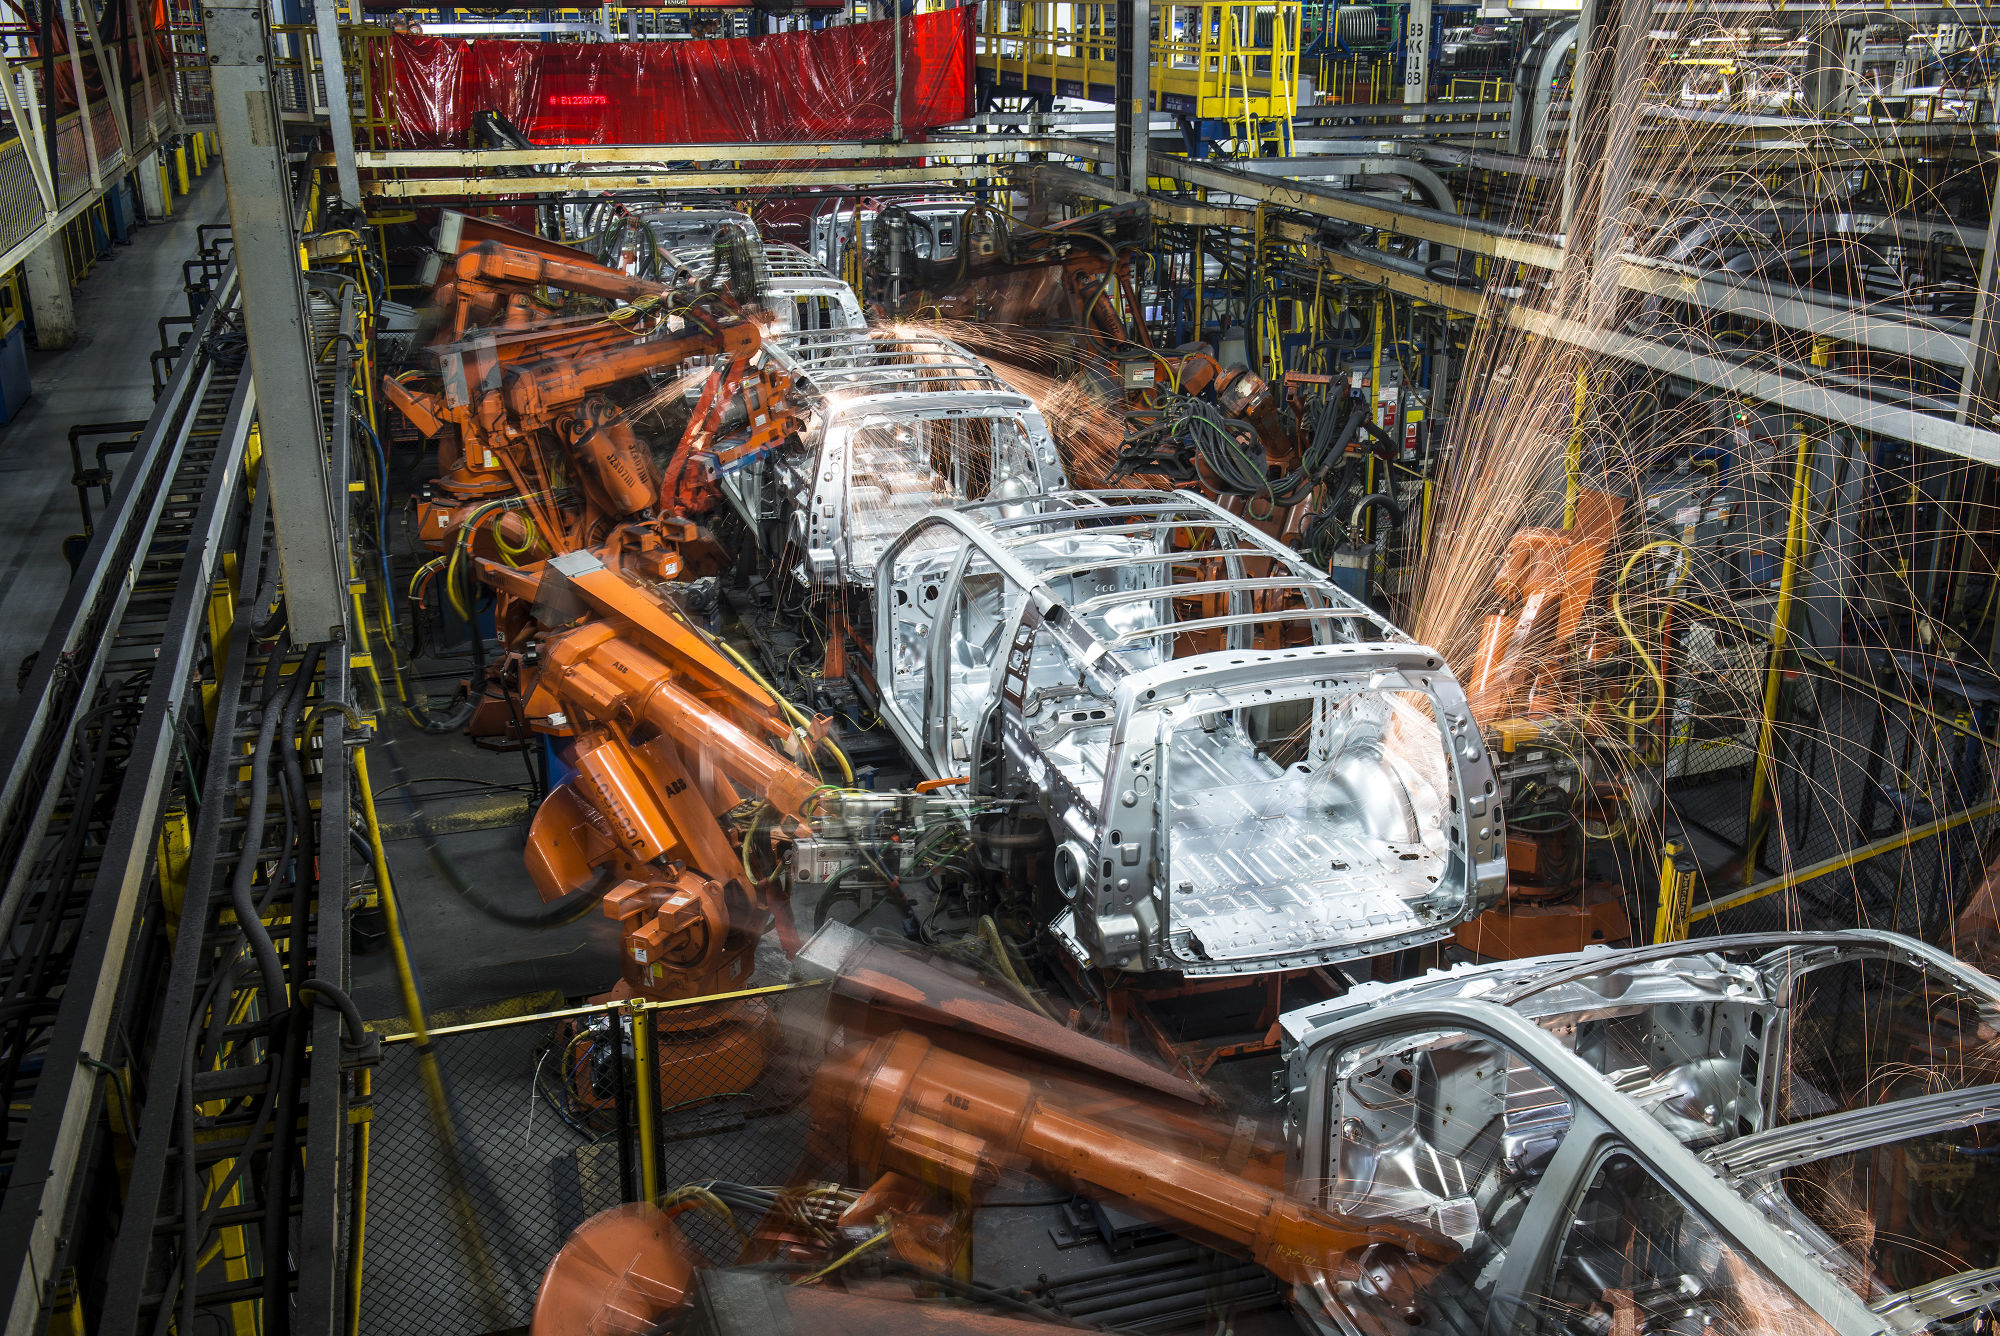 Robotic machines weld together the frames of vehicles at the General Motors assembly plant in Arlington, Texas.